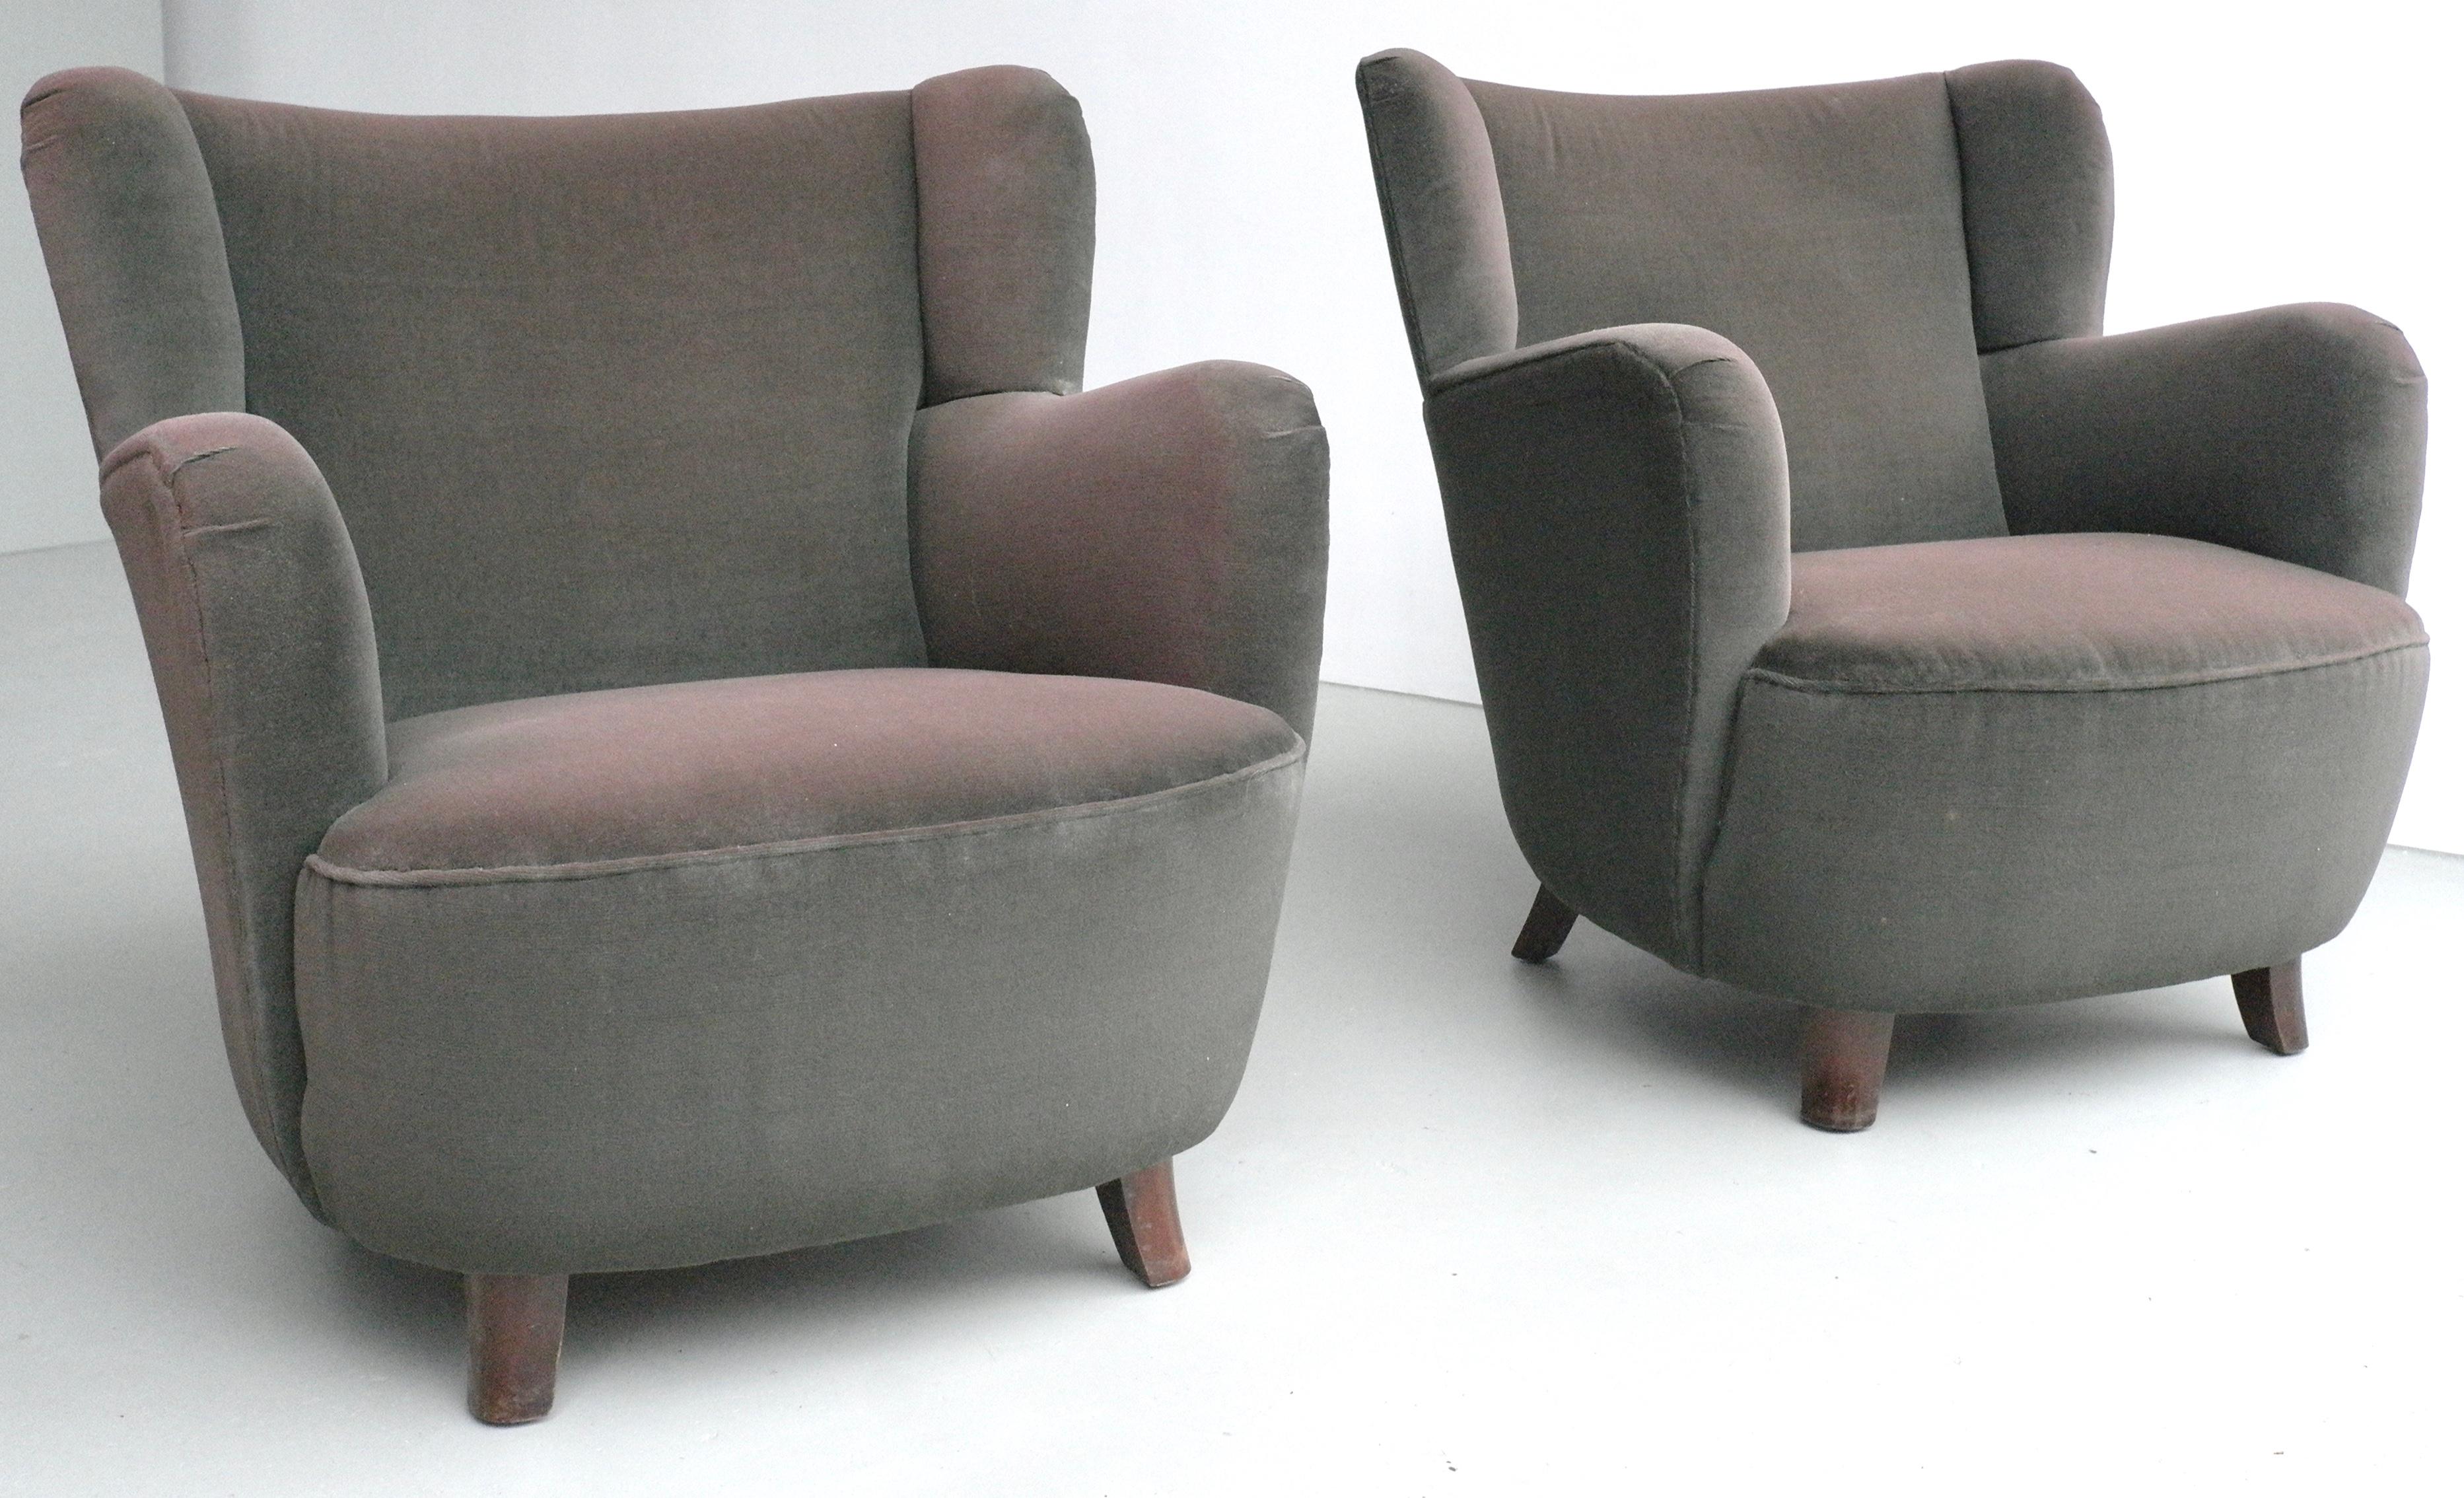 Pair of Mid-Century Modern Danish Lounge Chairs in Brown Eggplant Glow Velvet In Fair Condition For Sale In Den Haag, NL